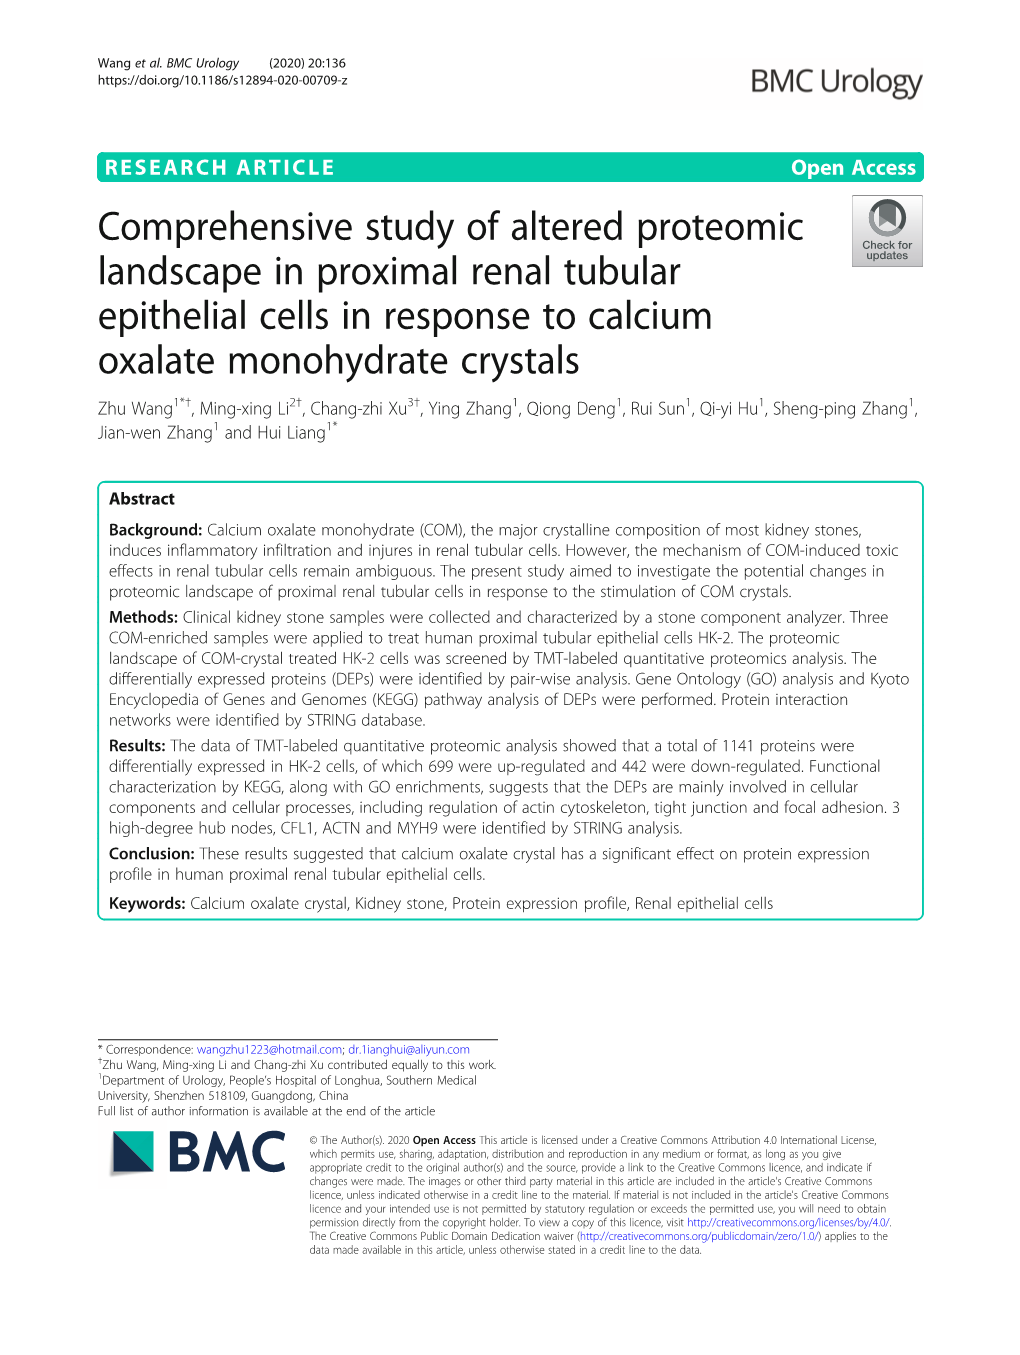 Comprehensive Study of Altered Proteomic Landscape in Proximal